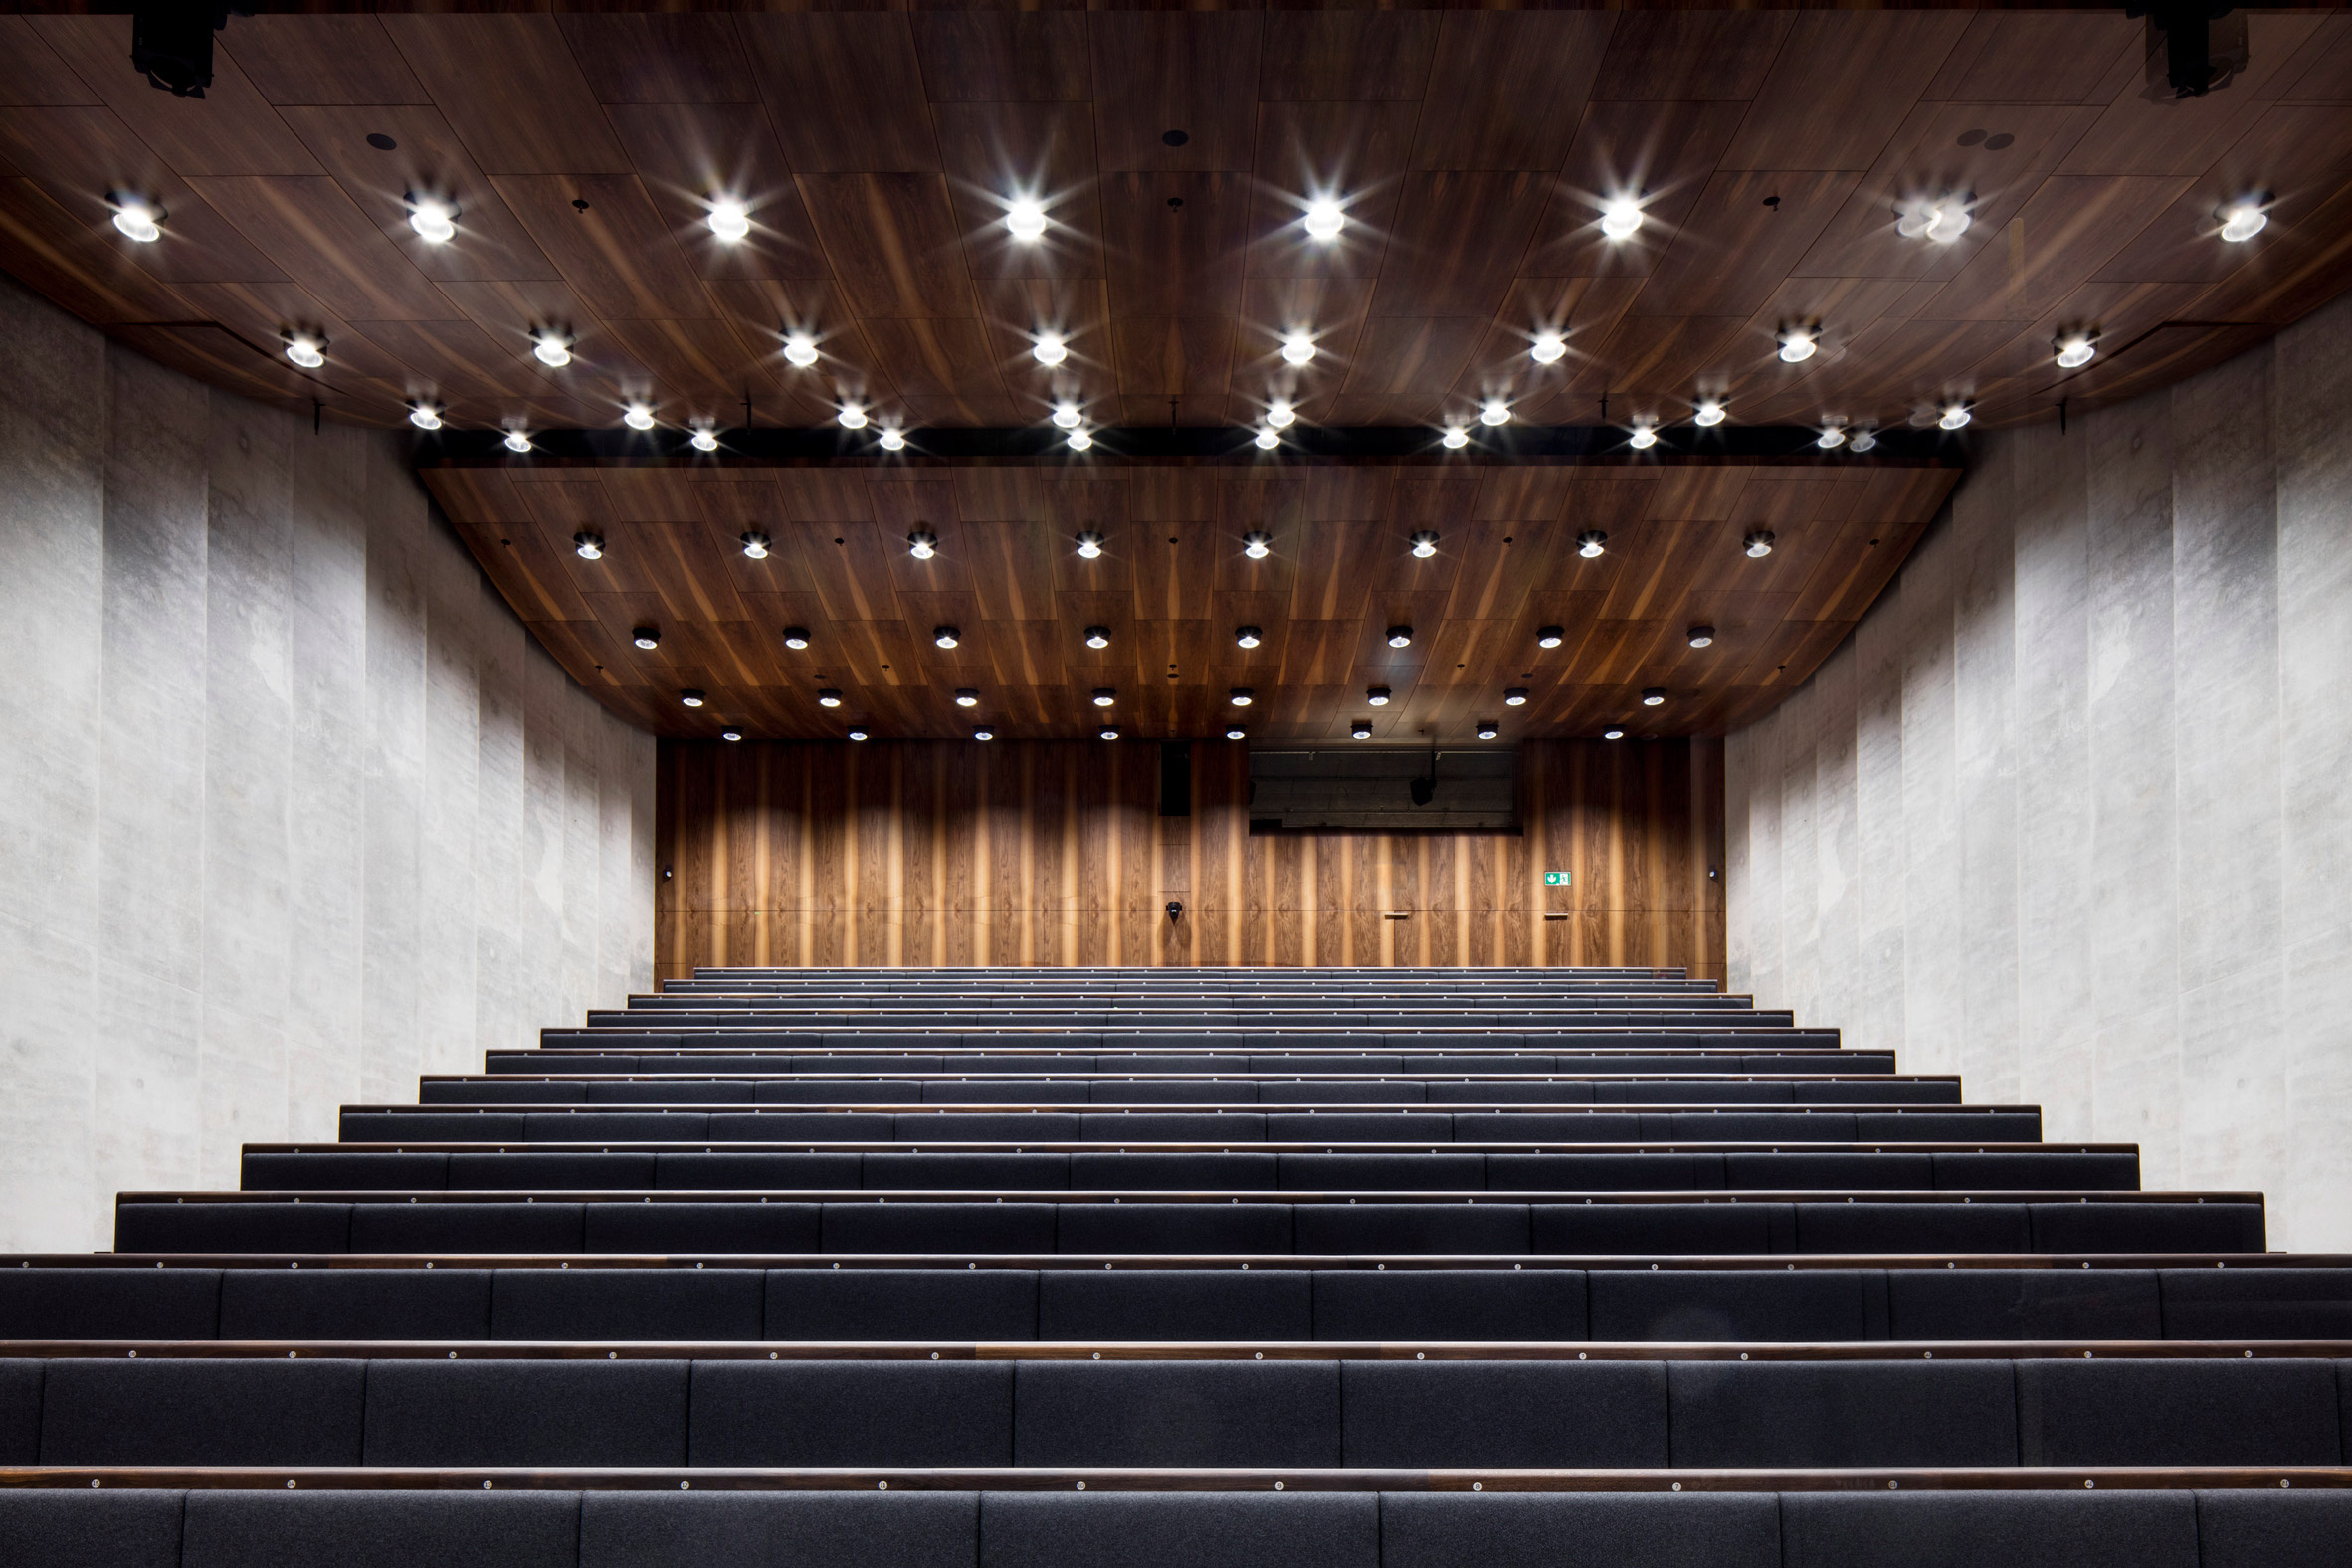 Auditorium of James Simon Galerie in Berlin by David Chipperfield Architects